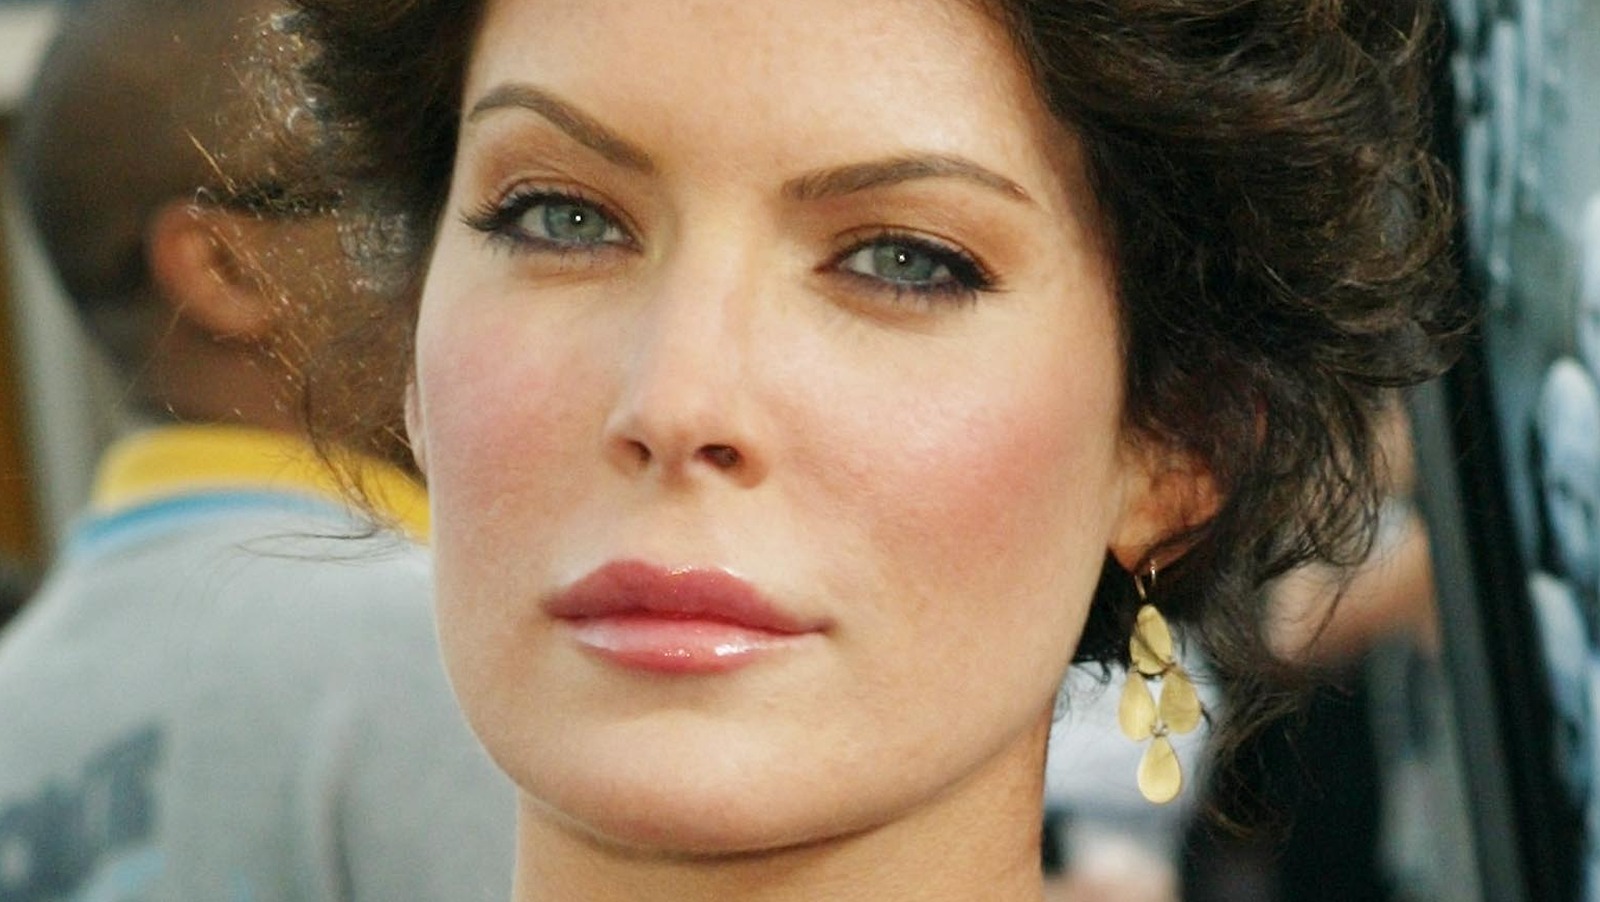 Laura flynn boyle pictures